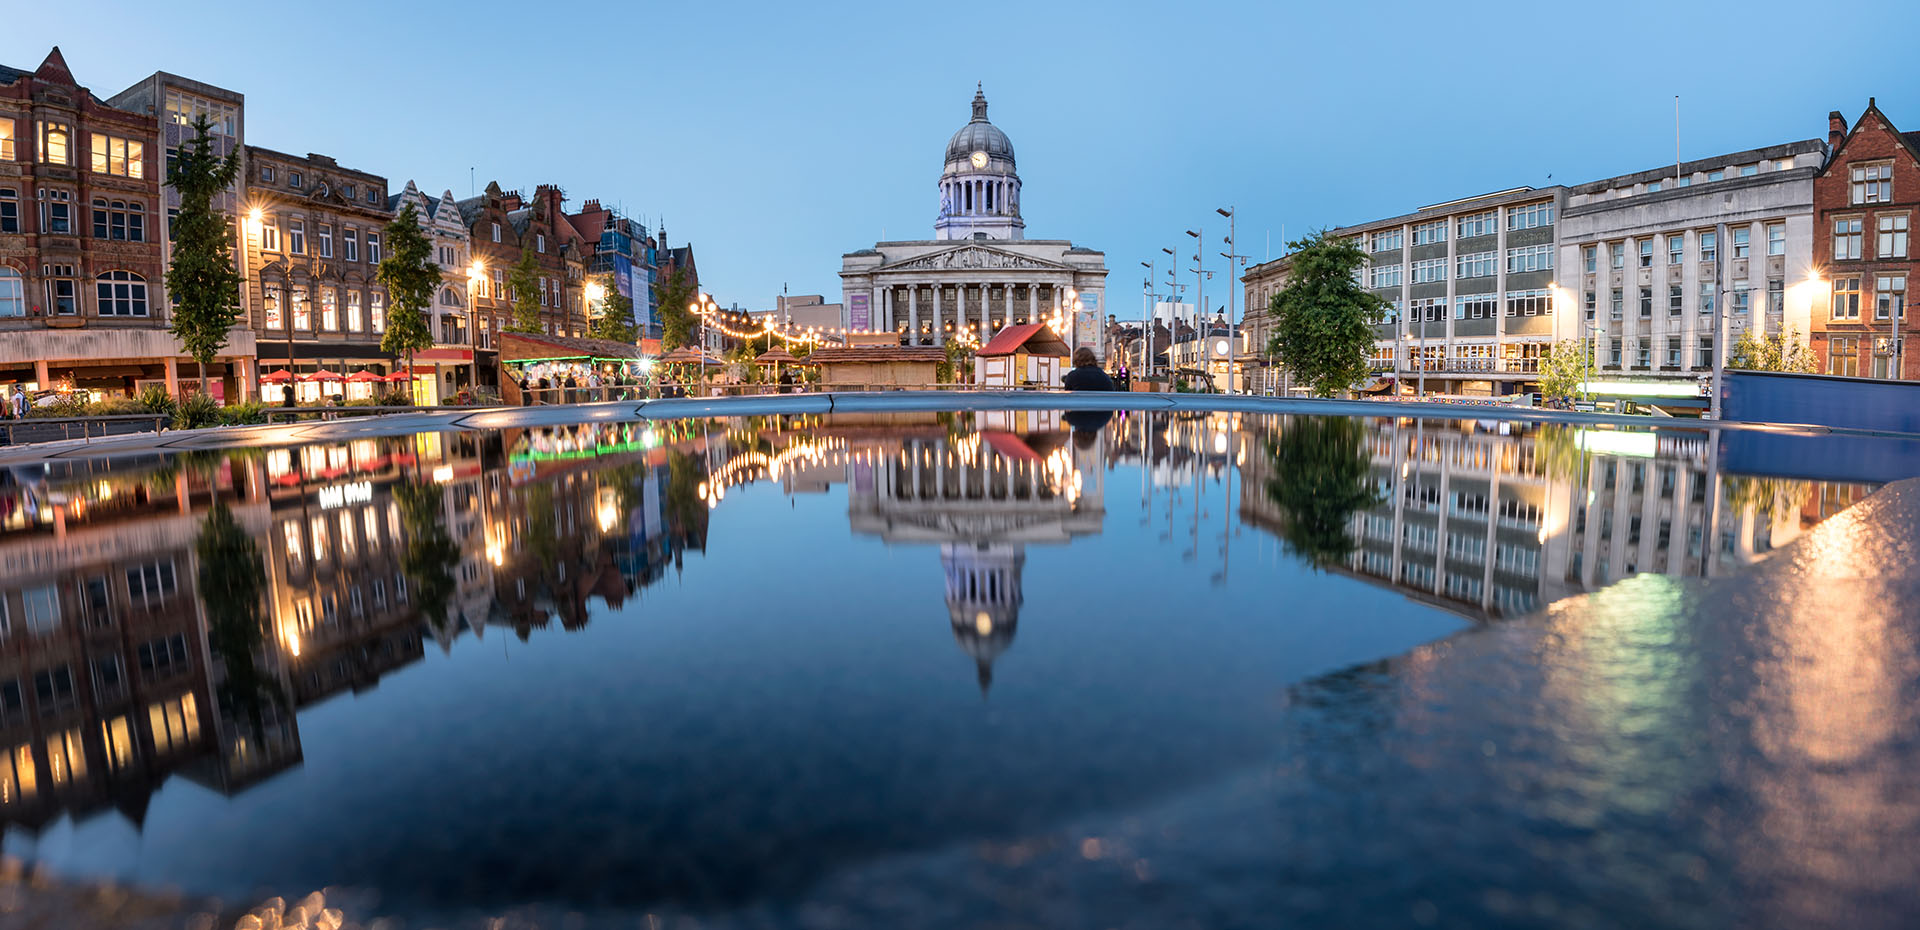 Image of the centre of Nottingham